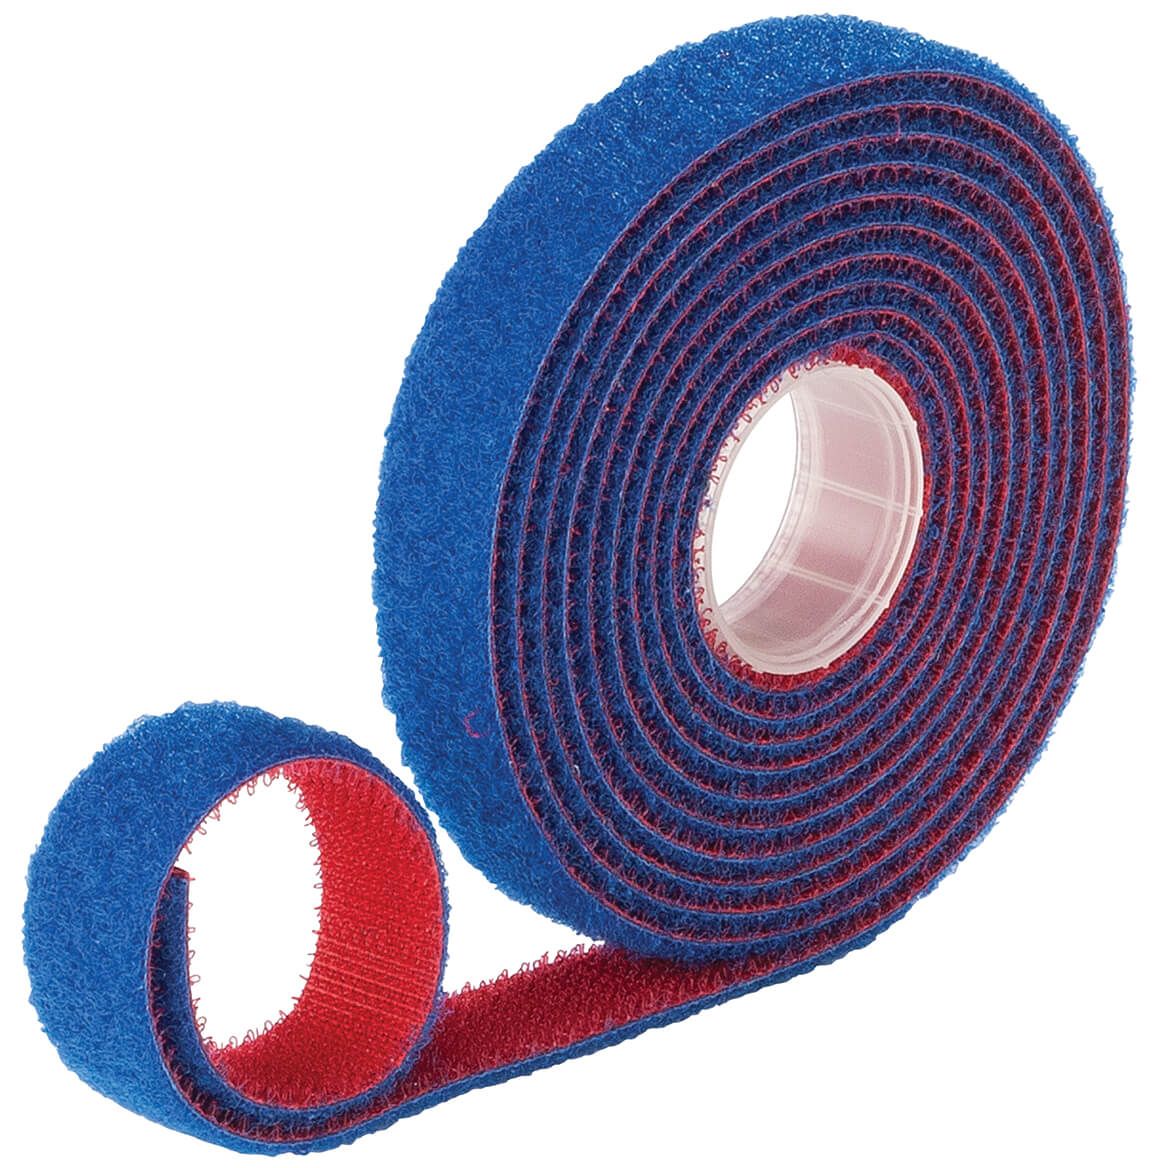 Hook and Loop Fastening Wrap 6 1/2 ft Roll + '-' + 375258